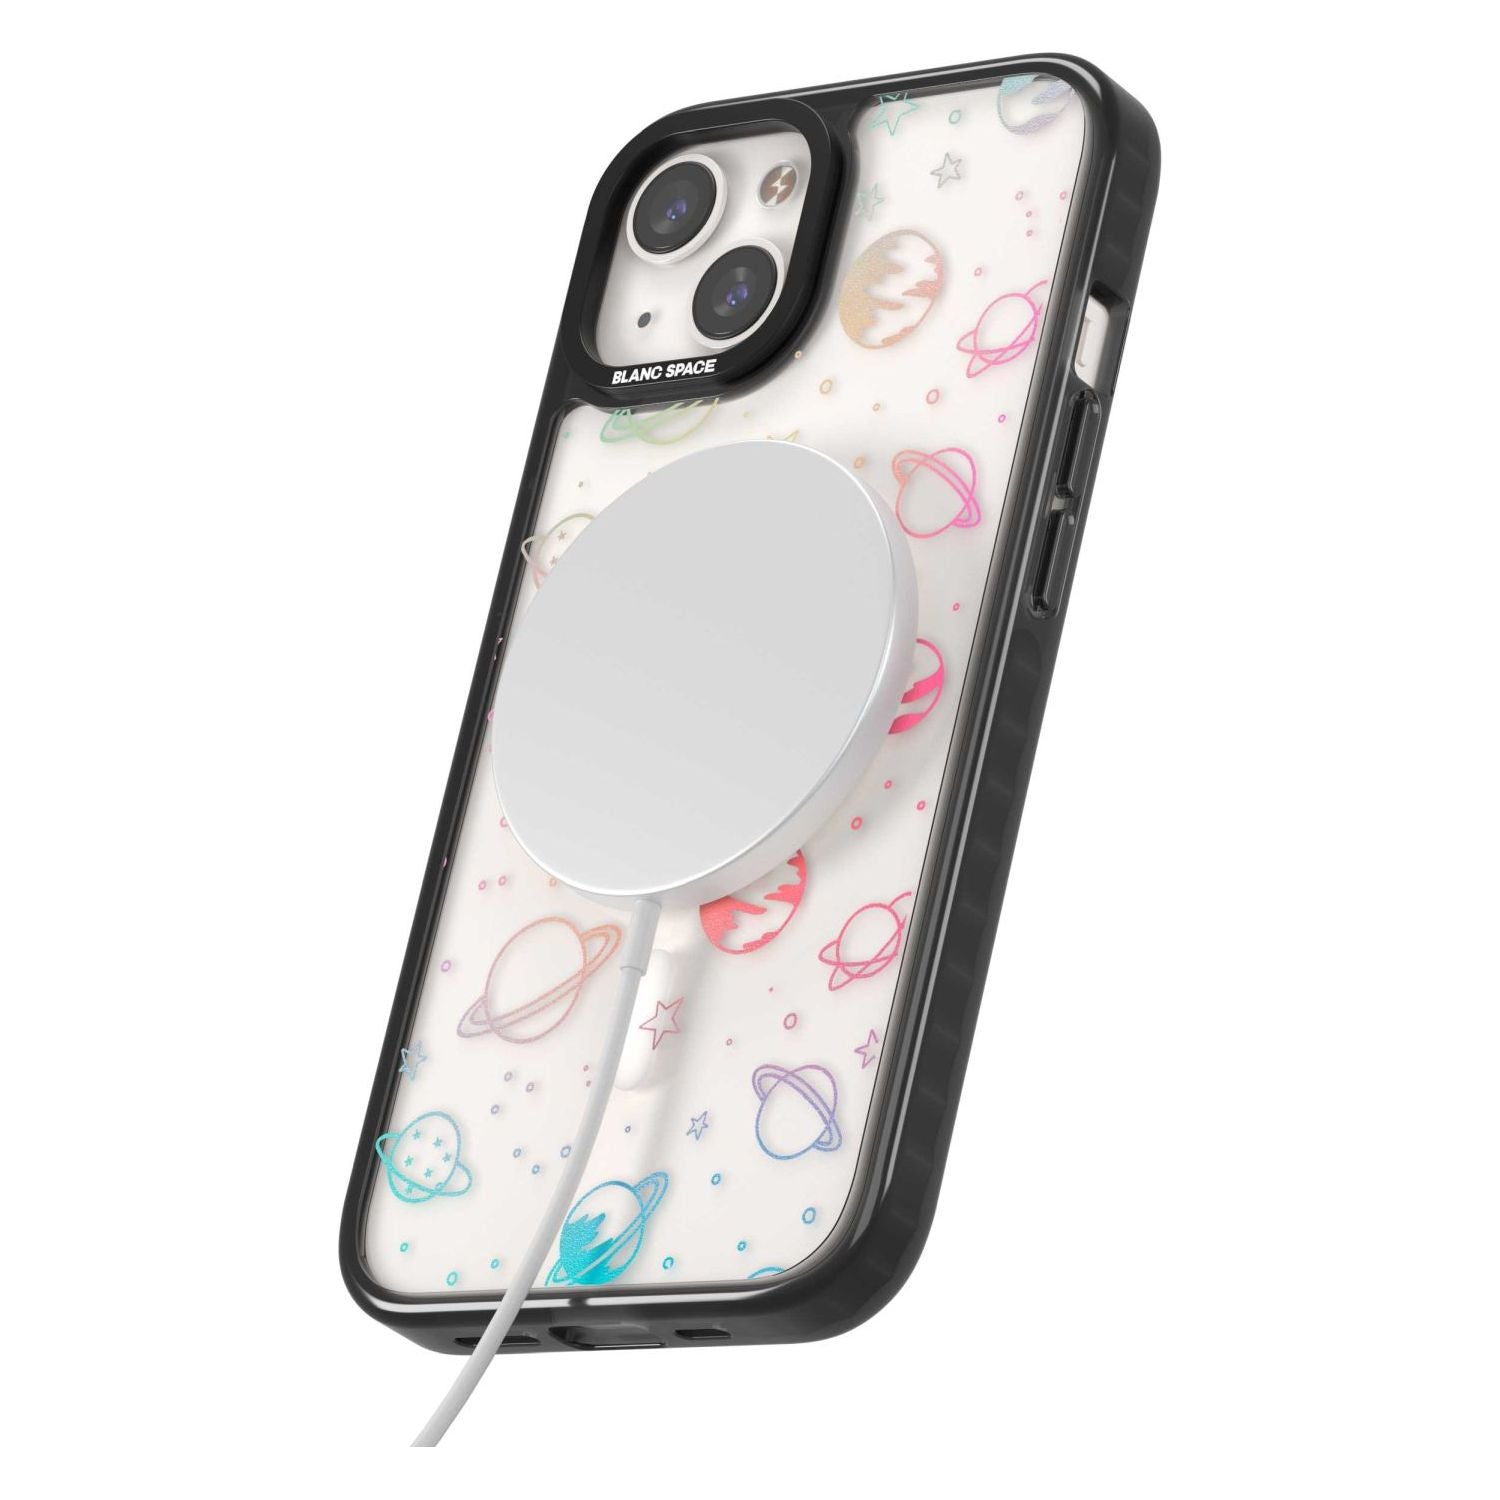 Cosmic Outer Space Design Pastels on Clear Phone Case iPhone 15 Pro Max / Black Impact Case,iPhone 15 Plus / Black Impact Case,iPhone 15 Pro / Black Impact Case,iPhone 15 / Black Impact Case,iPhone 15 Pro Max / Impact Case,iPhone 15 Plus / Impact Case,iPhone 15 Pro / Impact Case,iPhone 15 / Impact Case,iPhone 15 Pro Max / Magsafe Black Impact Case,iPhone 15 Plus / Magsafe Black Impact Case,iPhone 15 Pro / Magsafe Black Impact Case,iPhone 15 / Magsafe Black Impact Case,iPhone 14 Pro Max / Black Impact Case,i